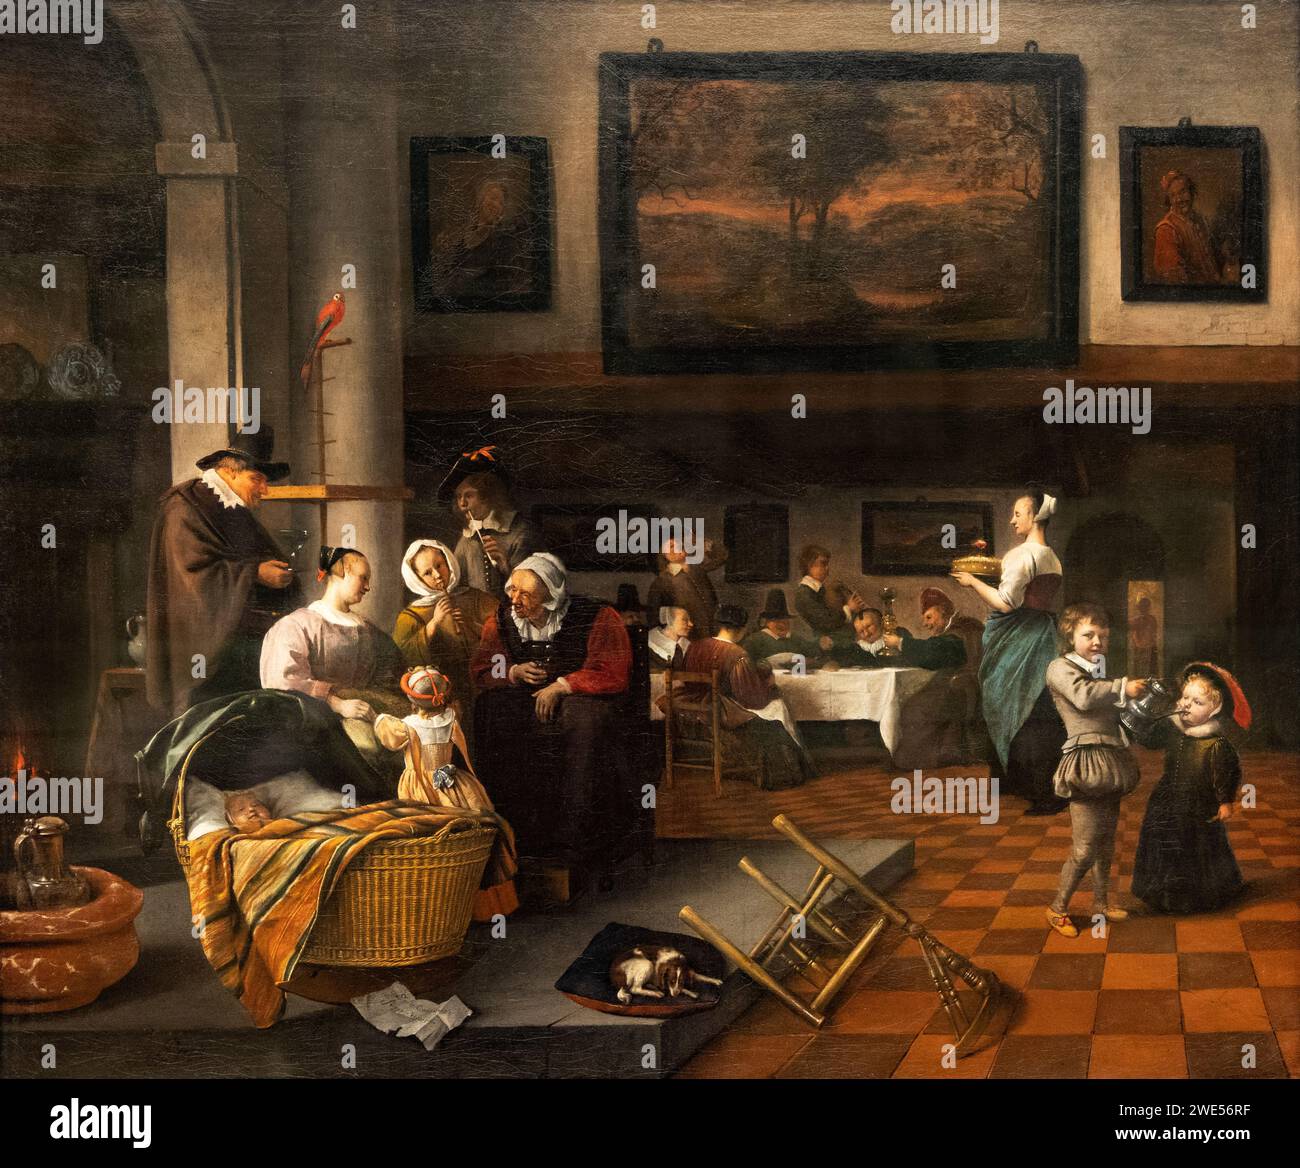 Jan Steen painting, 'The Christening' 1665-70; 17th century Dutch painter of the Dutch Golden Age, 1626-1679. Stock Photo